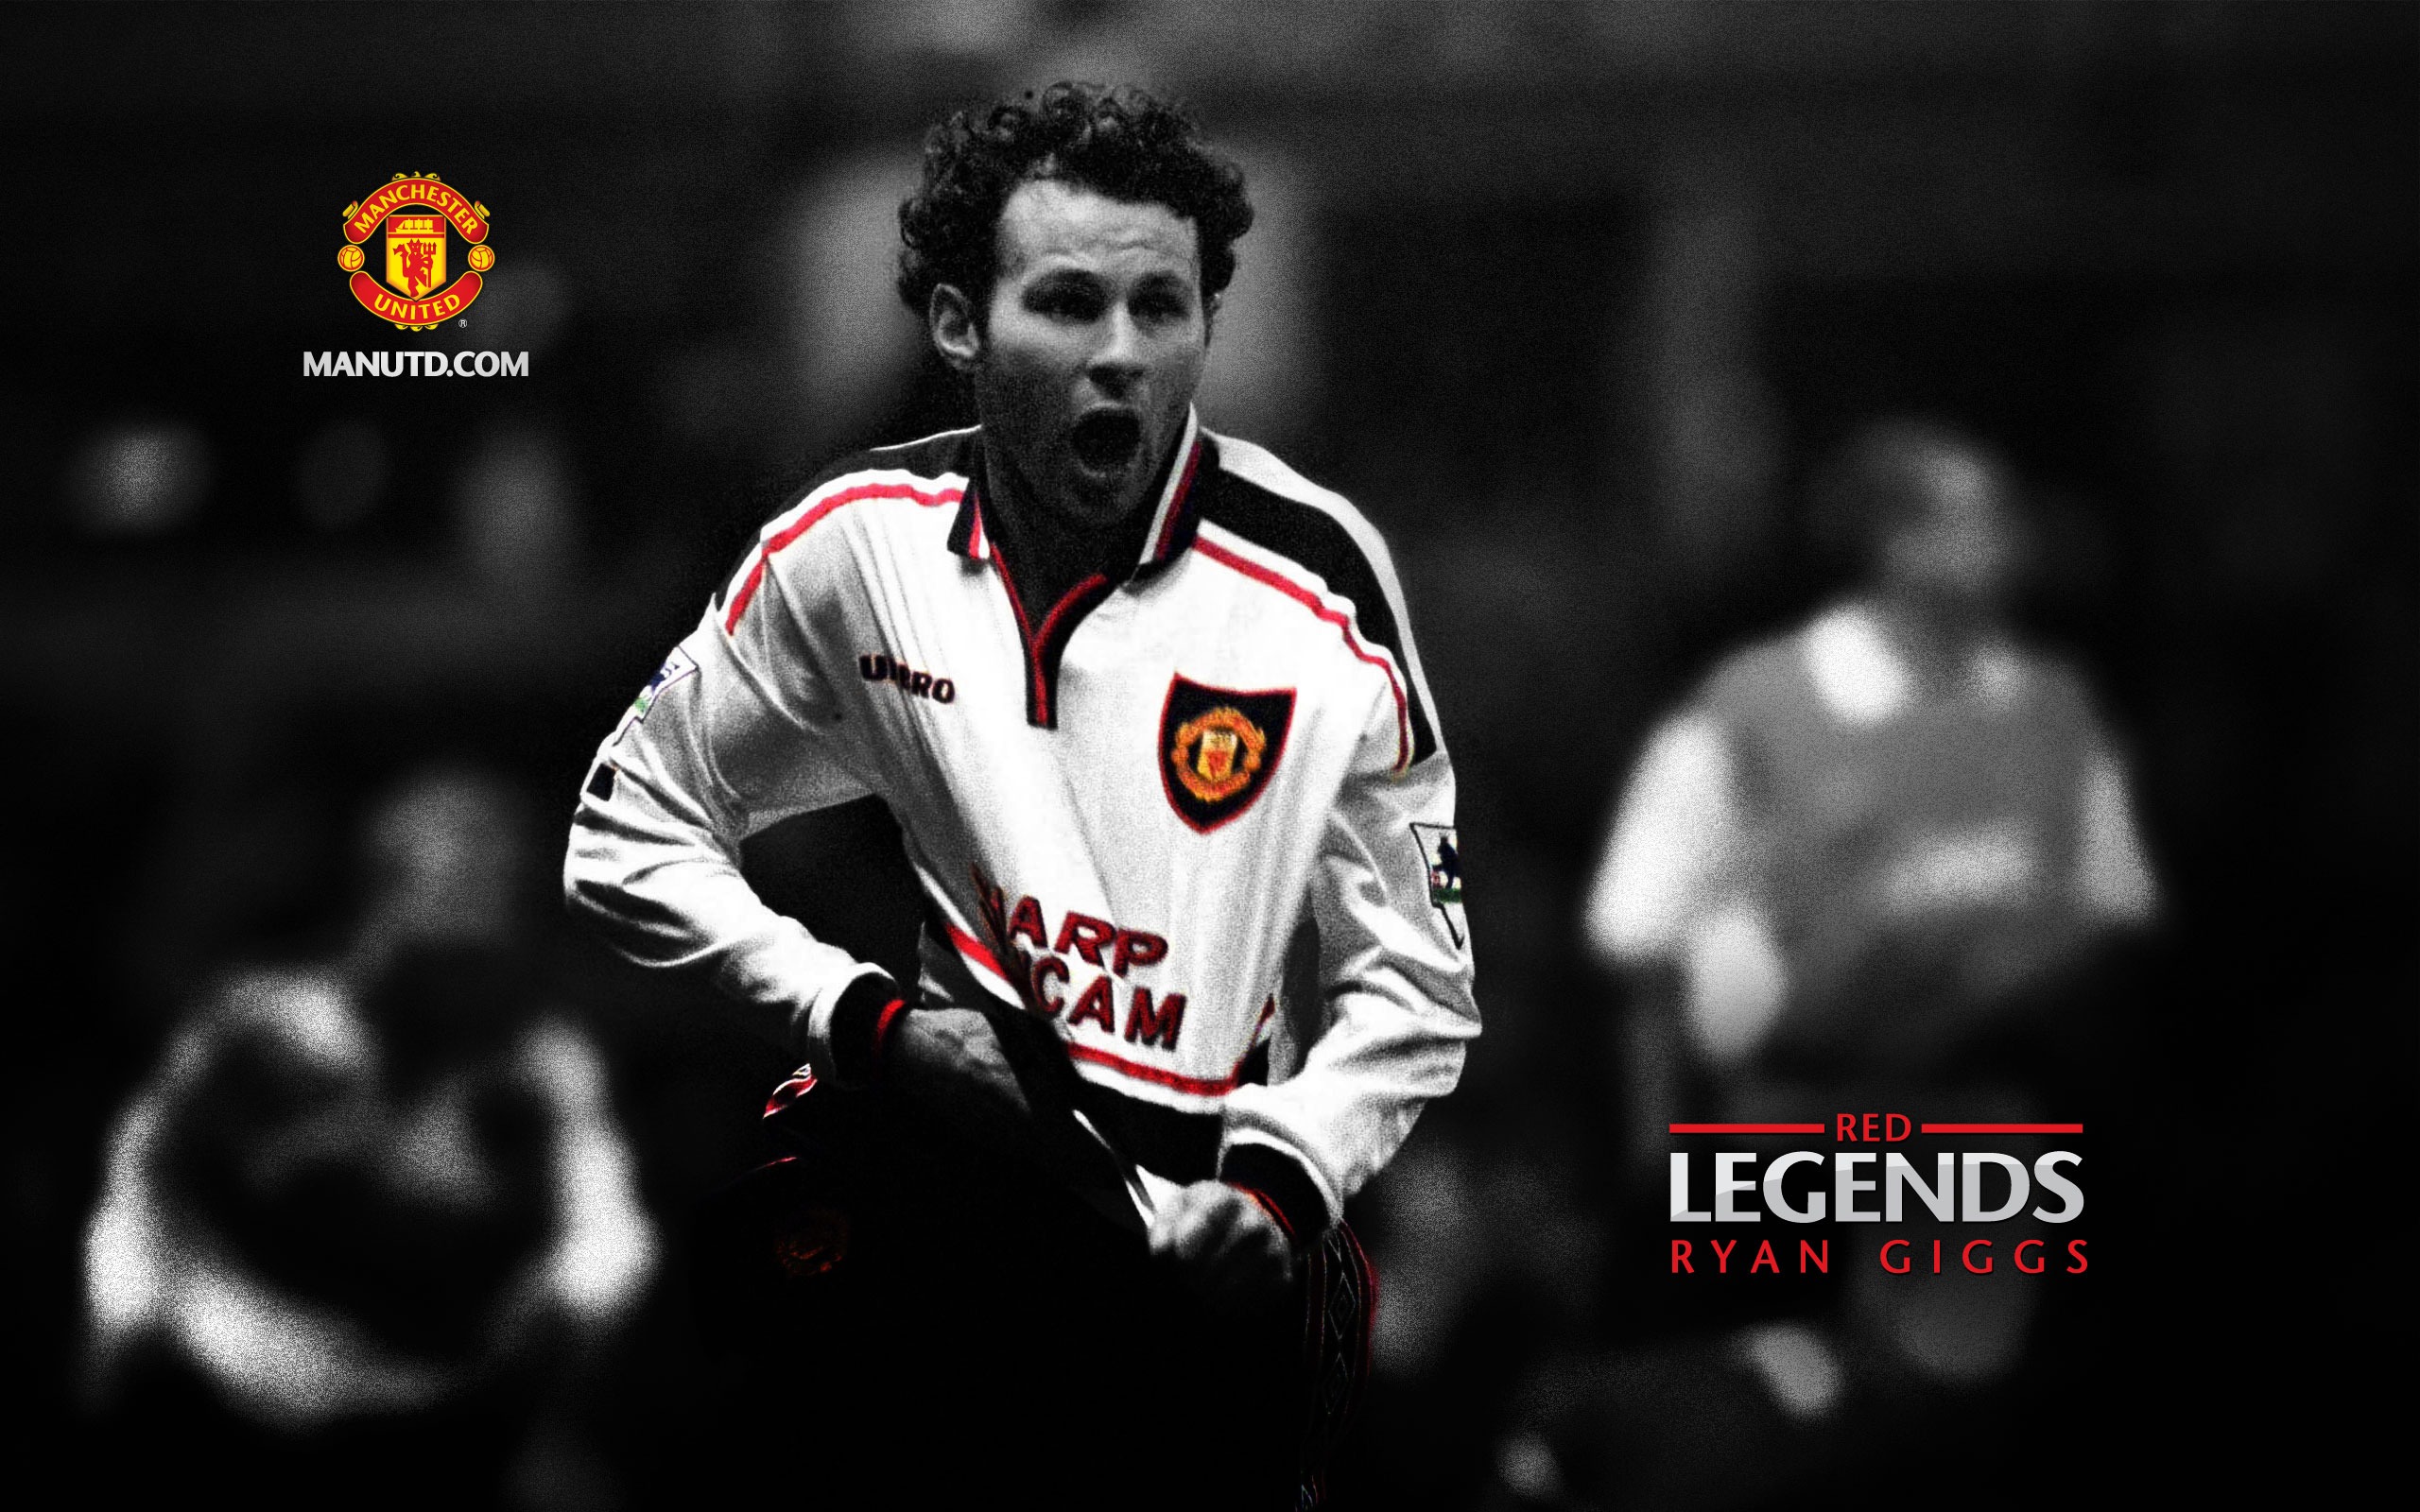 Ryan Giggs Red Legends Manchester United Wallpaper